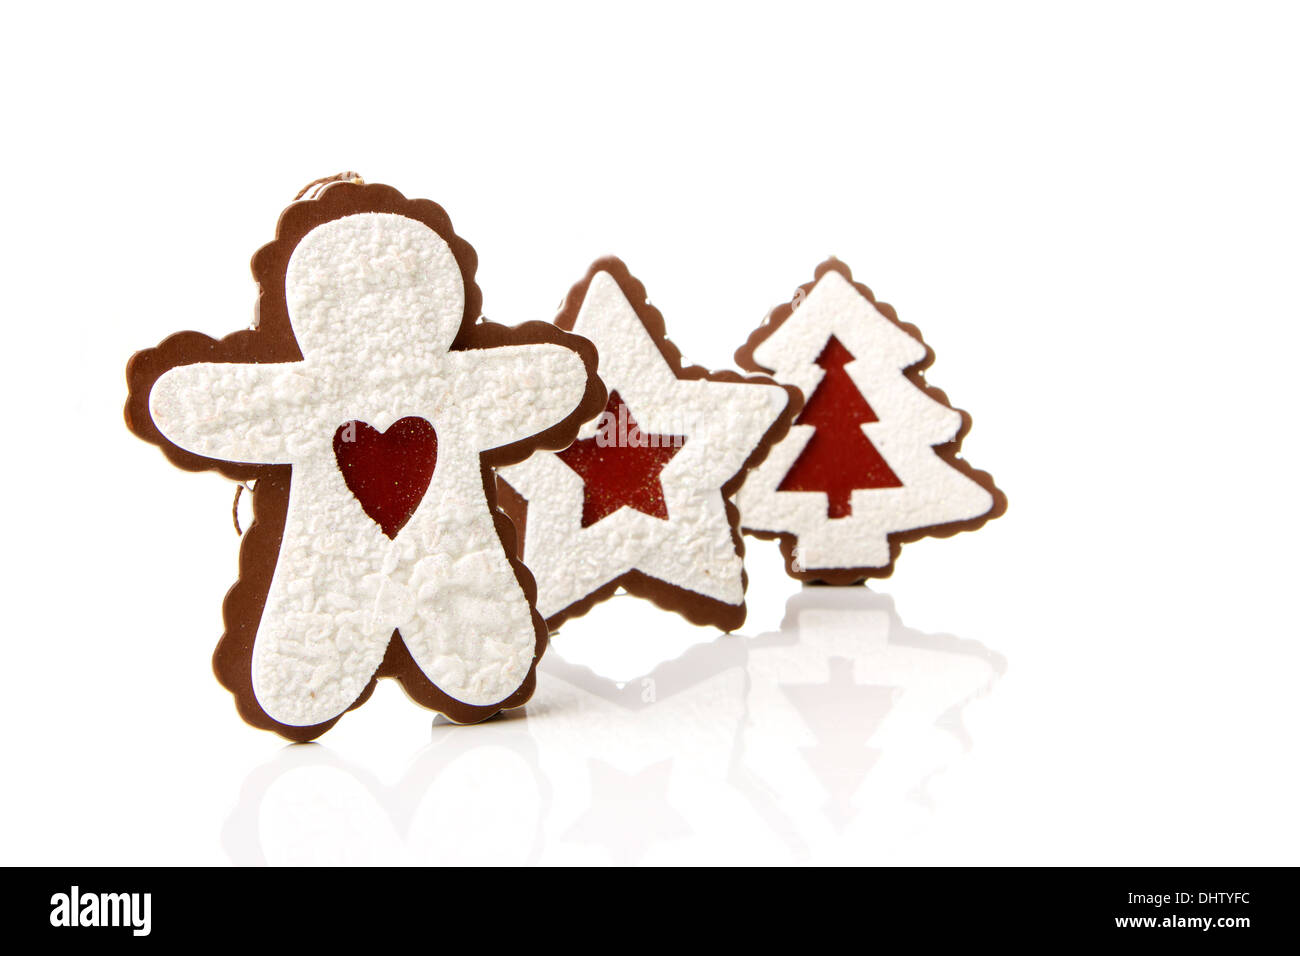 Gingerbread man, christmas tree, star as a Christmas decoration with white background Stock Photo